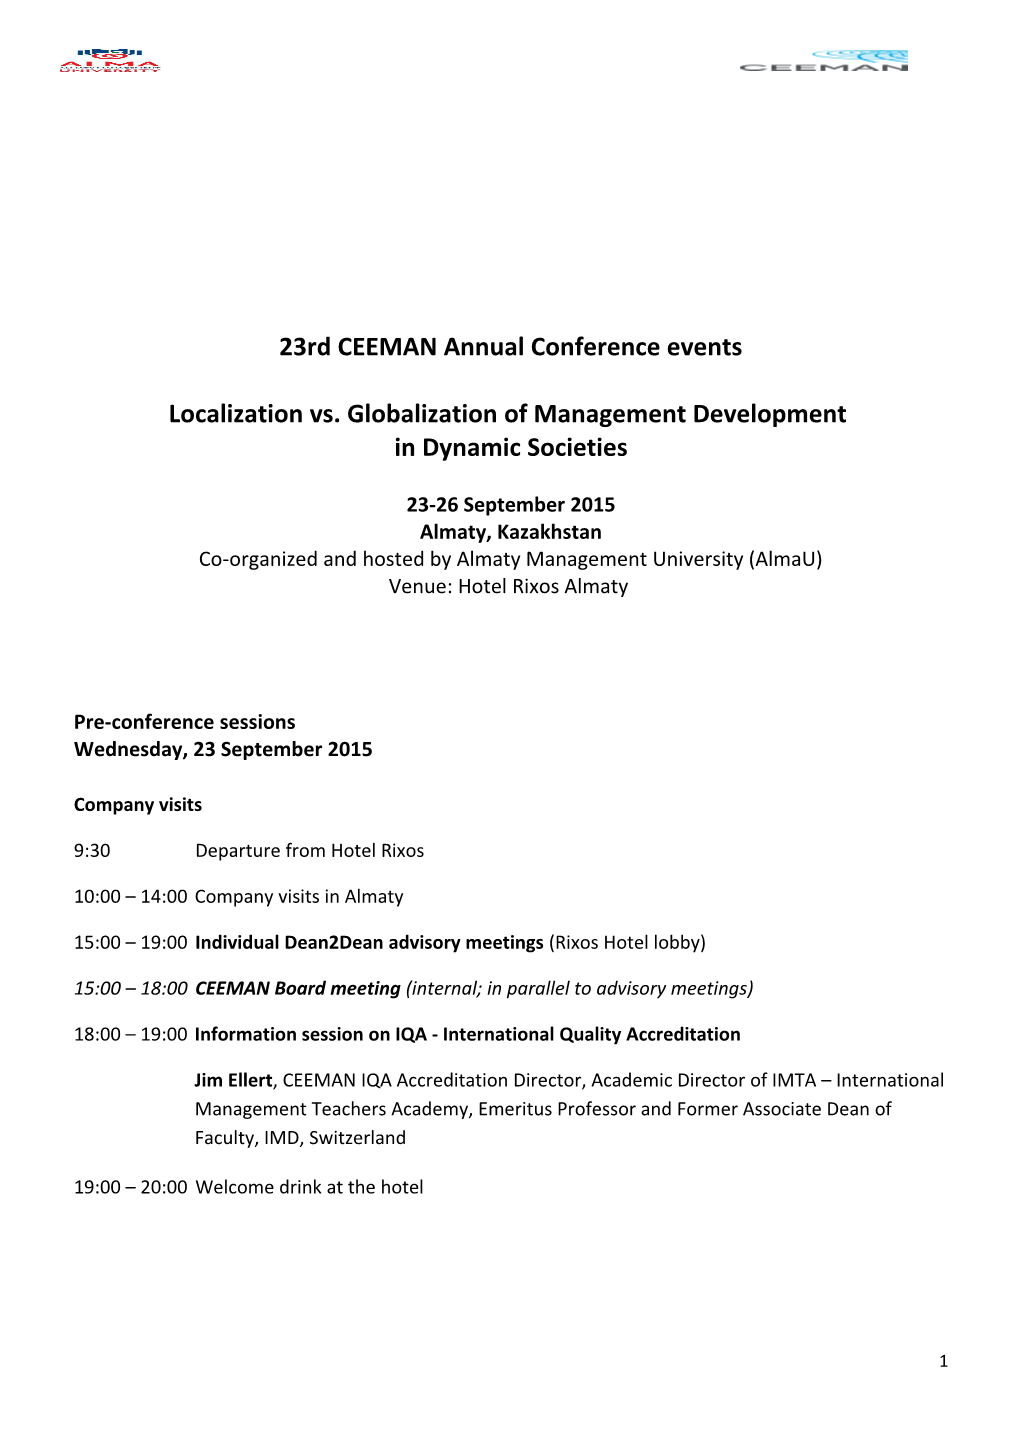 23Rd CEEMAN Annual Conference Events